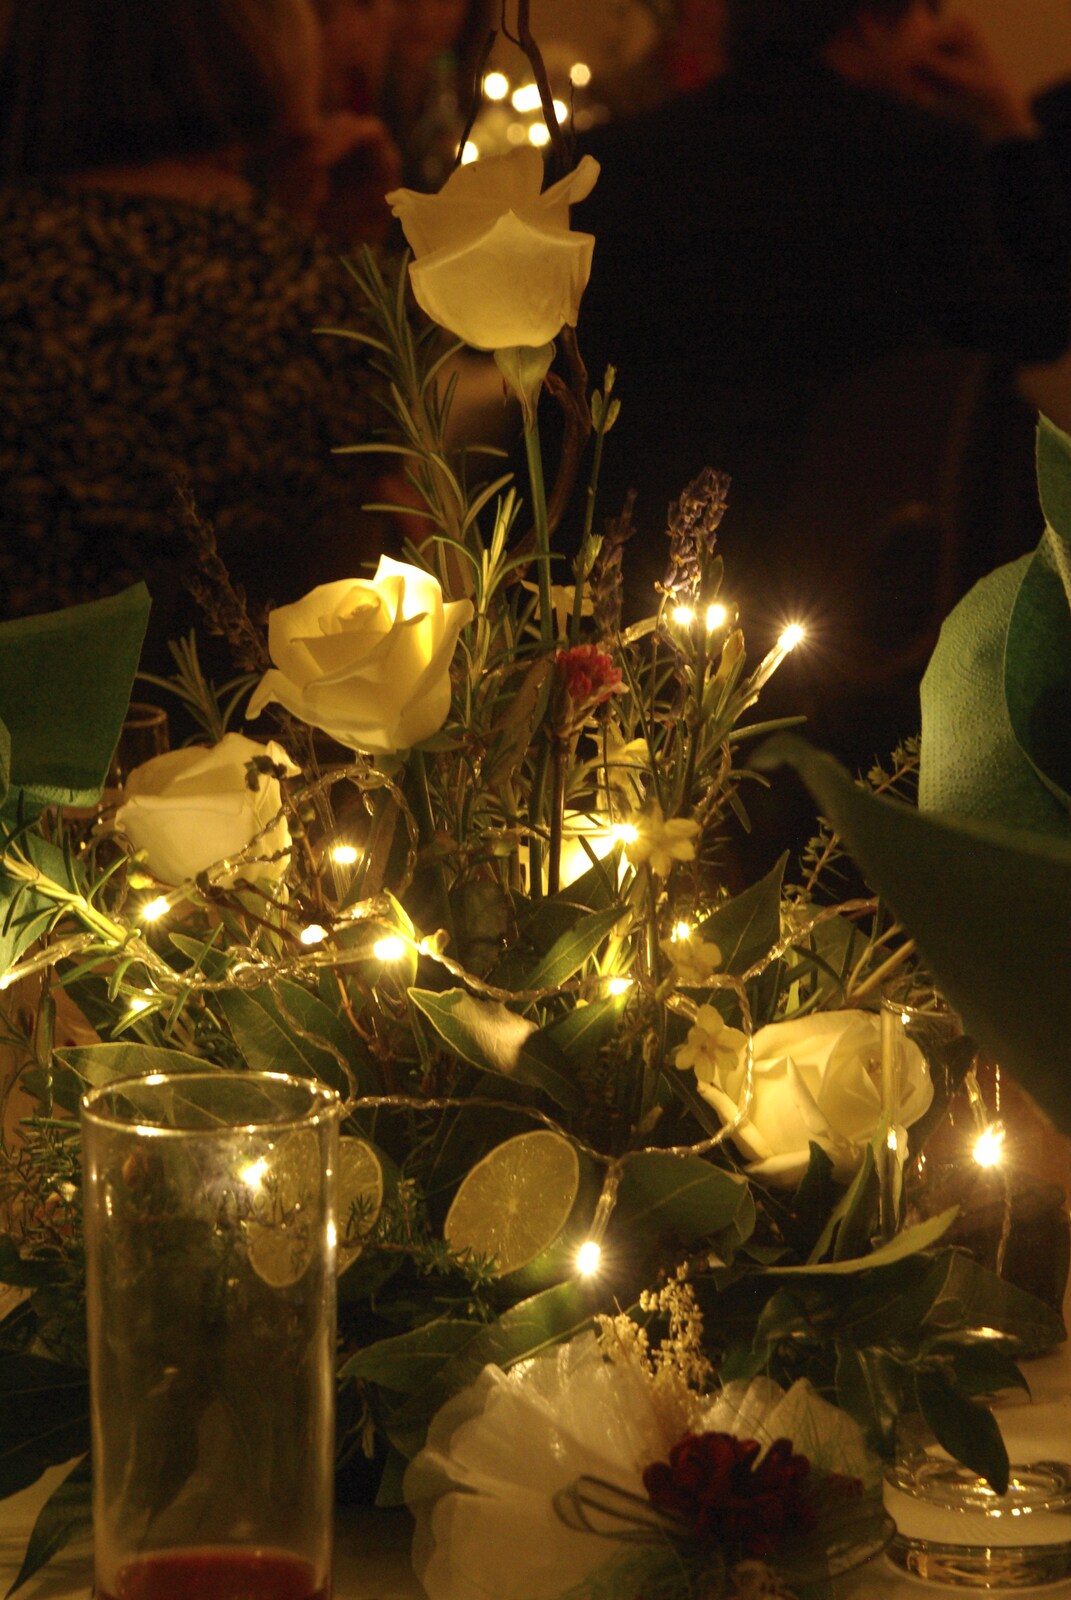 Flowers and fairy lights from An Oxford Wedding, Iffley, Oxfordshire - 20th December 2008